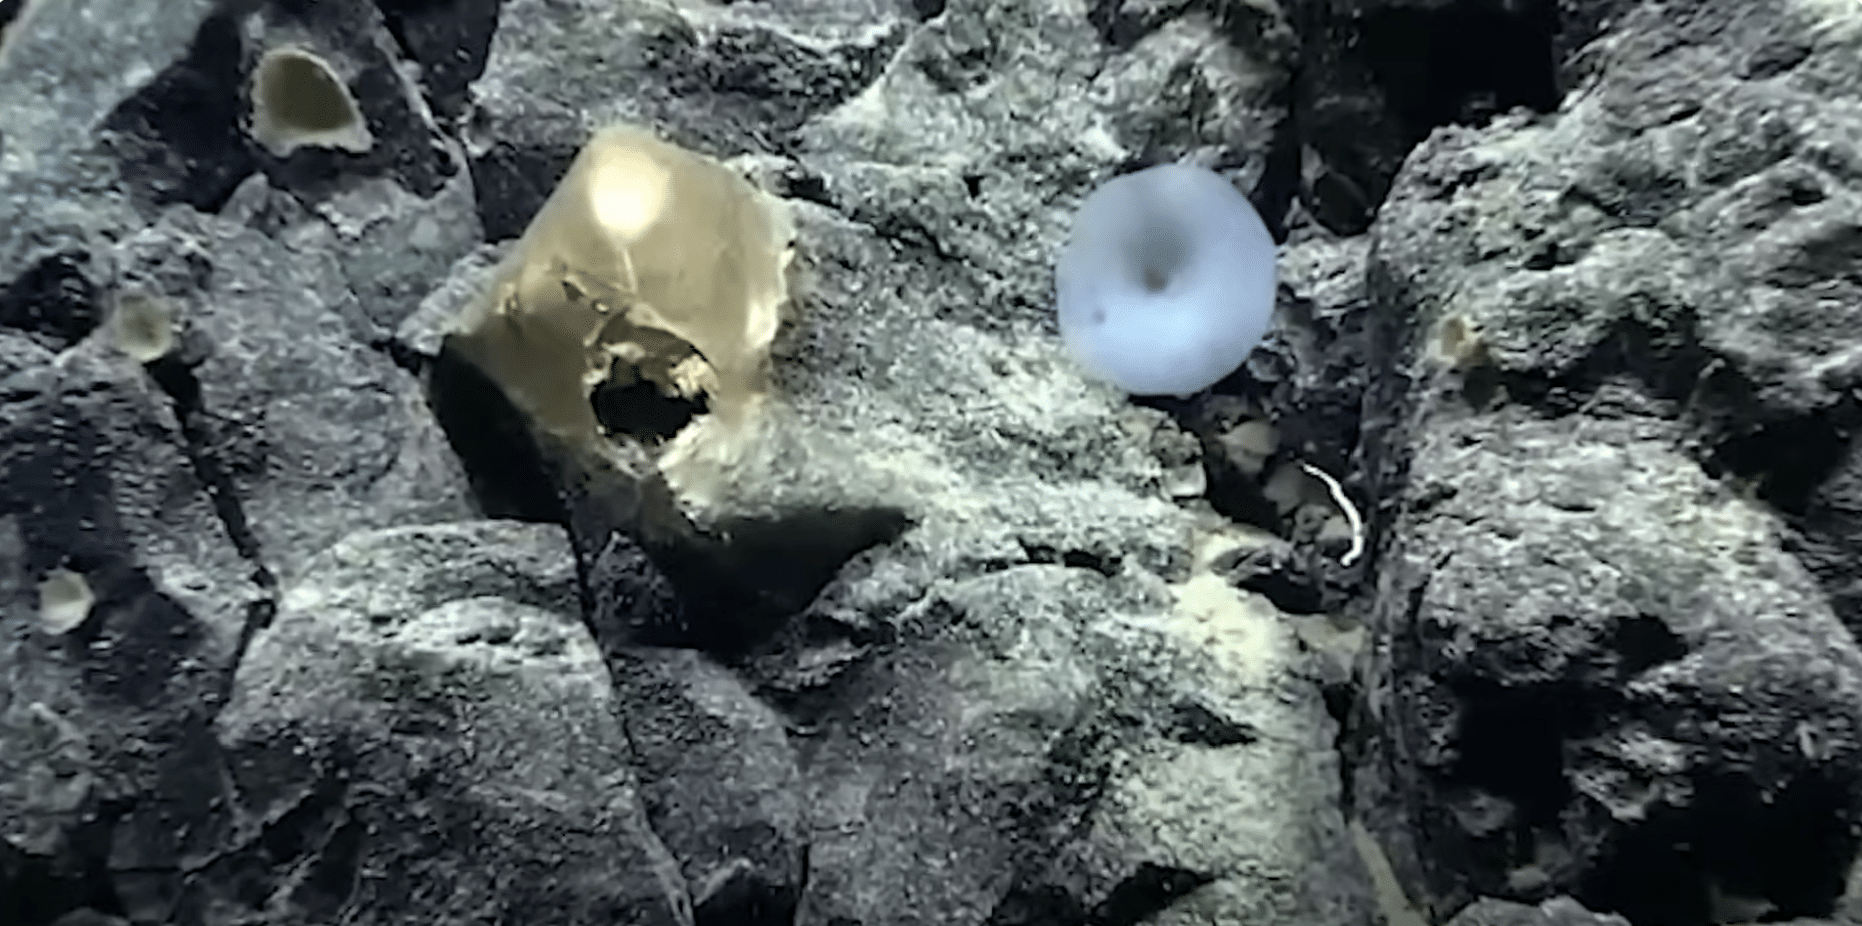 Scientists discover mysterious golden ‘Orb’ in the ocean